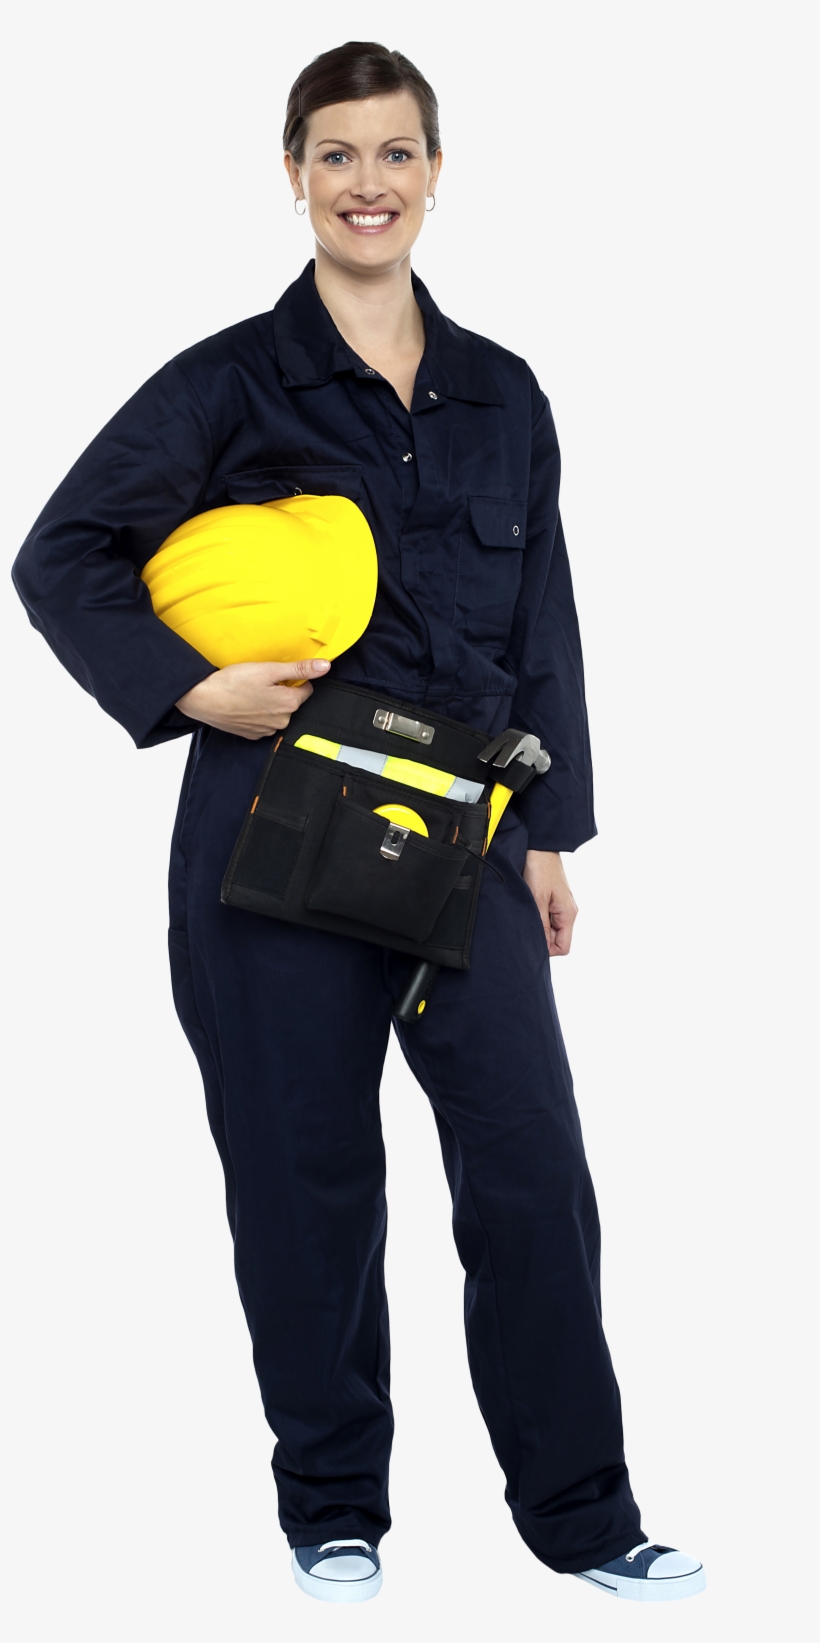 Women Worker Png Image - Photograph, transparent png #1137664